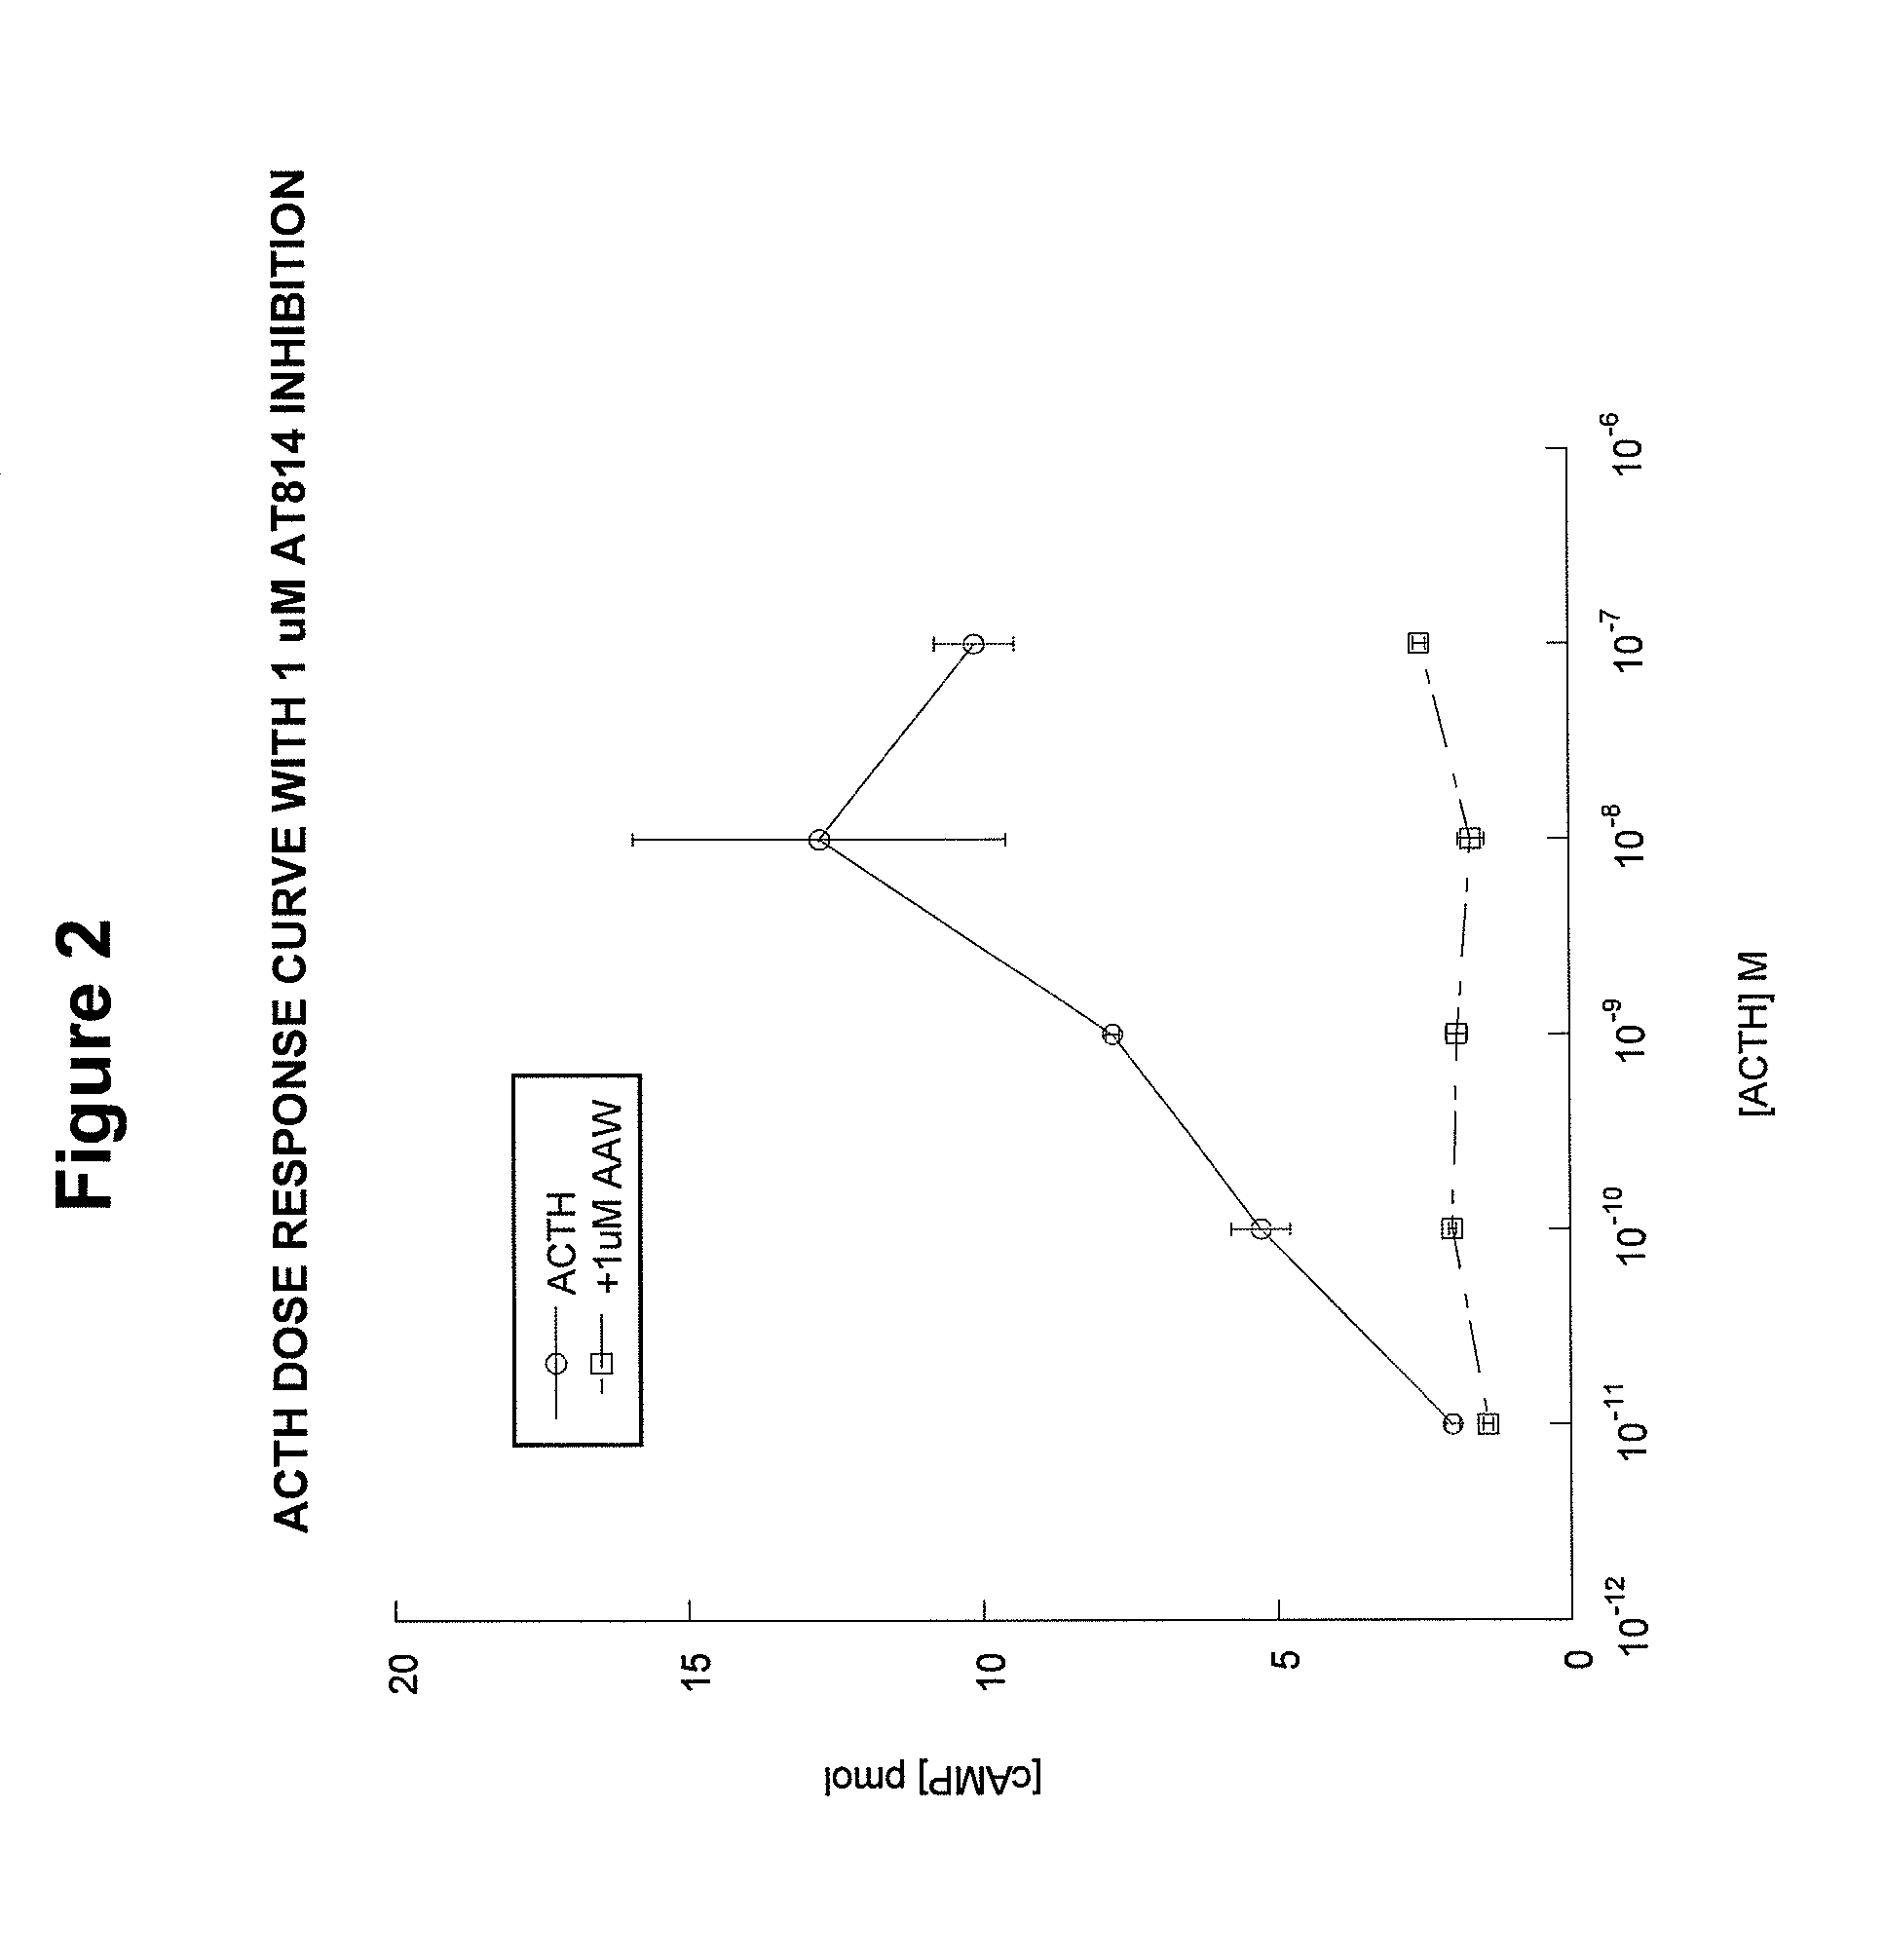 Methods of treating overproduction of cortisol using ACTH antagonist peptides